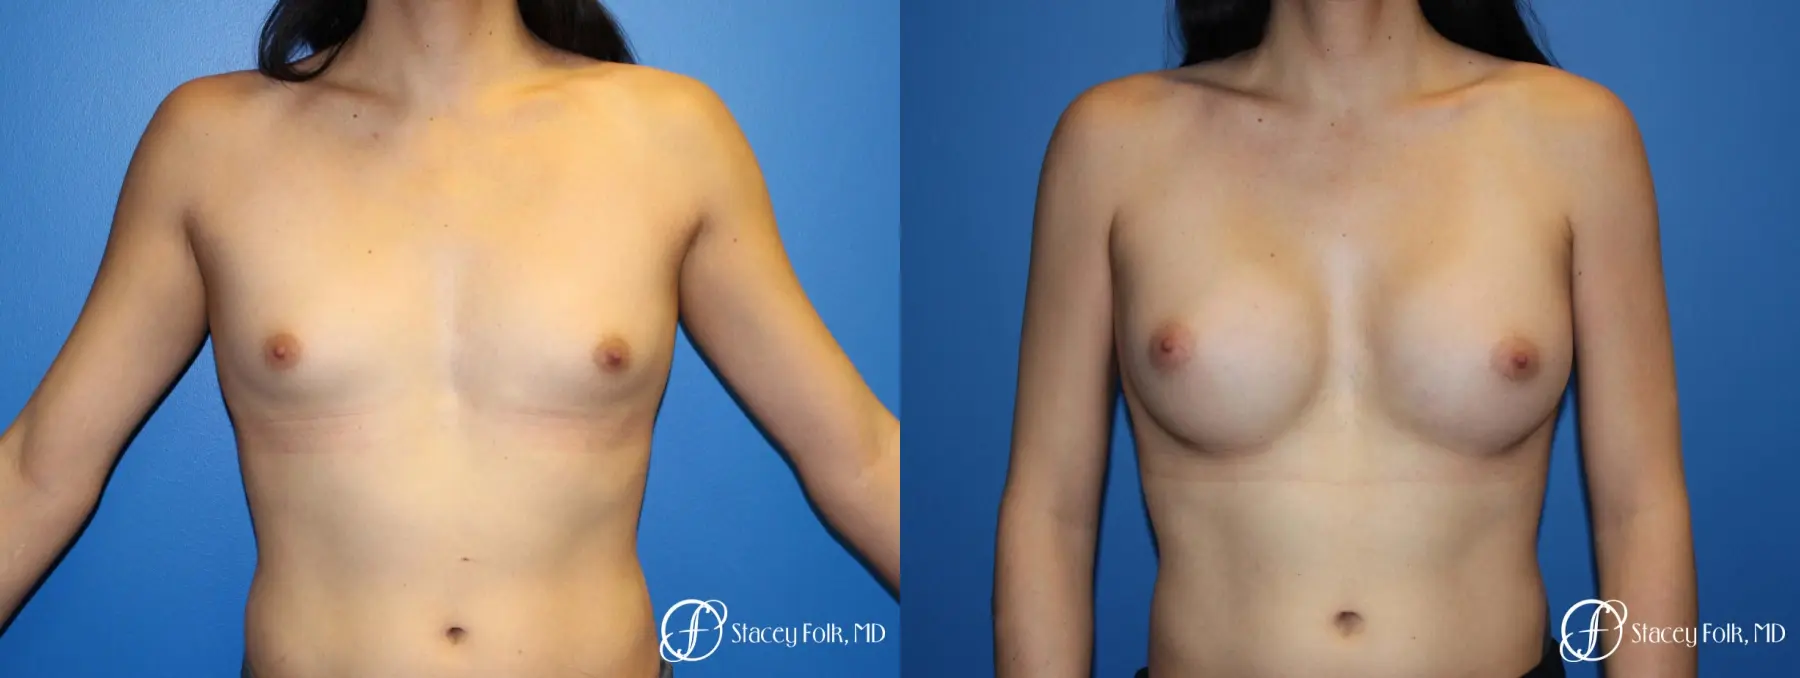 MTF (Male To Female Top Surgery) Breast Augmentation - Before and After